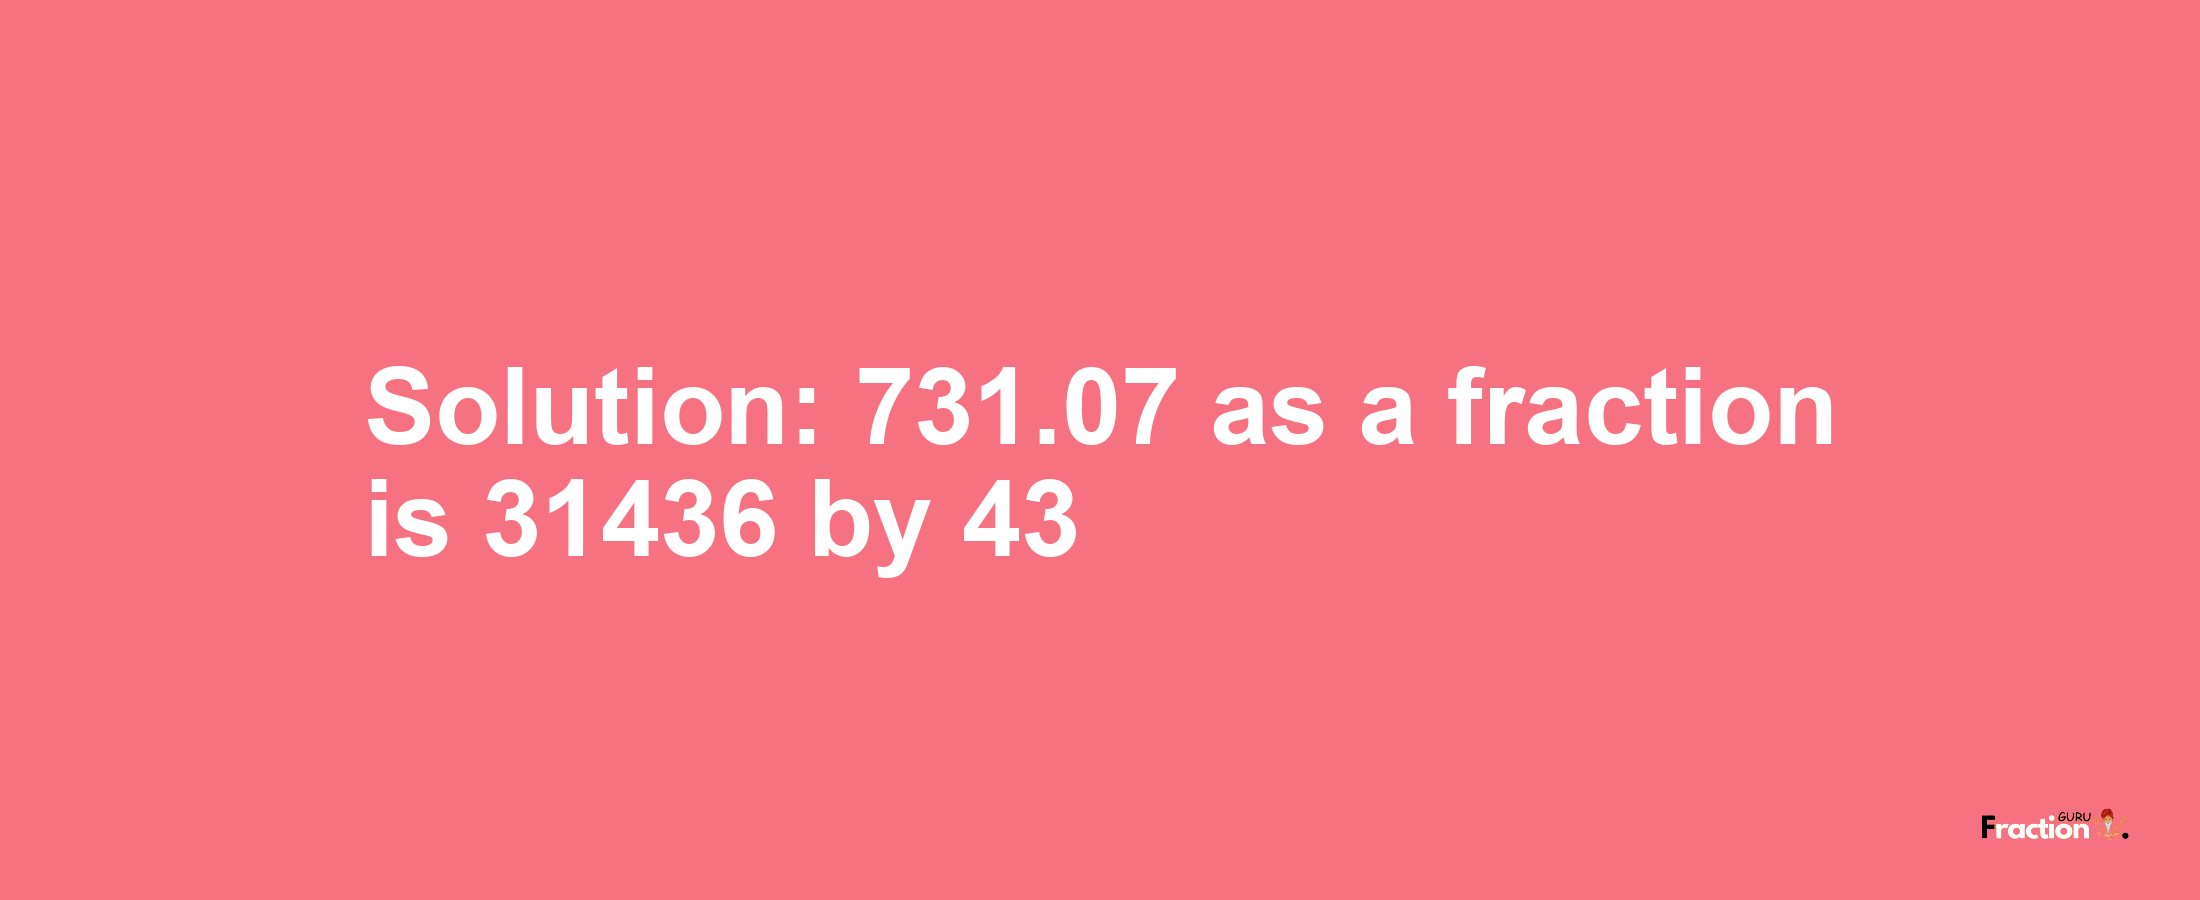 Solution:731.07 as a fraction is 31436/43